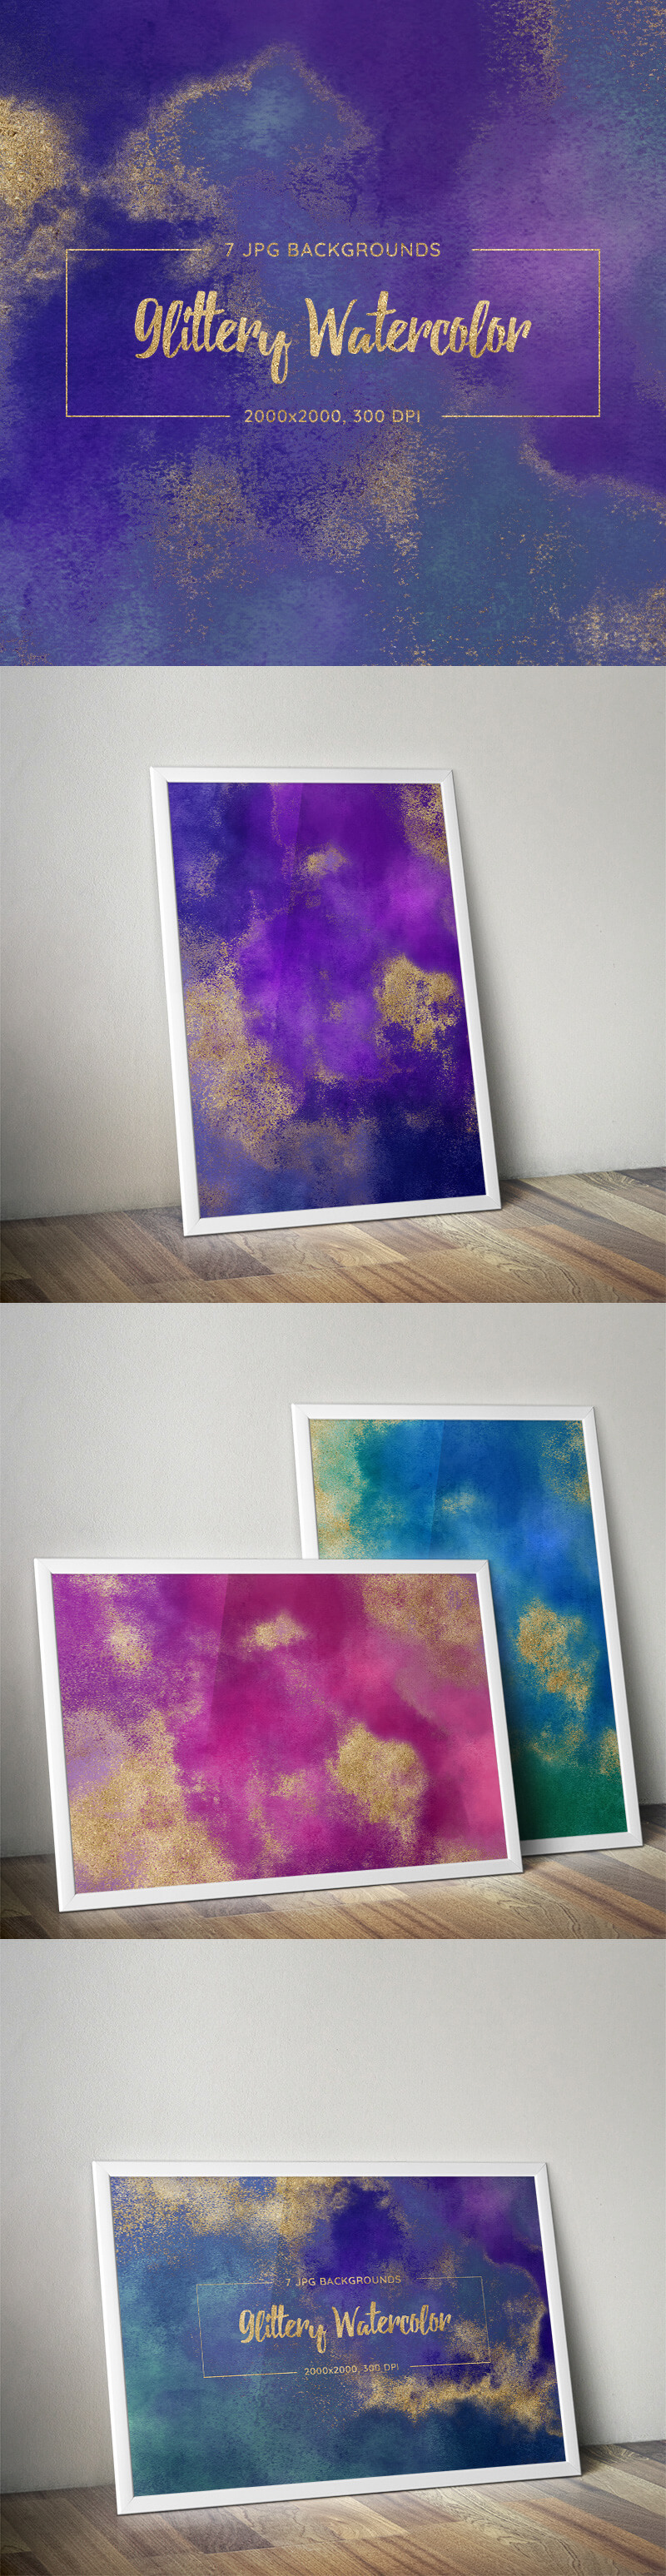 Glittery Watercolor Backgrounds Preview